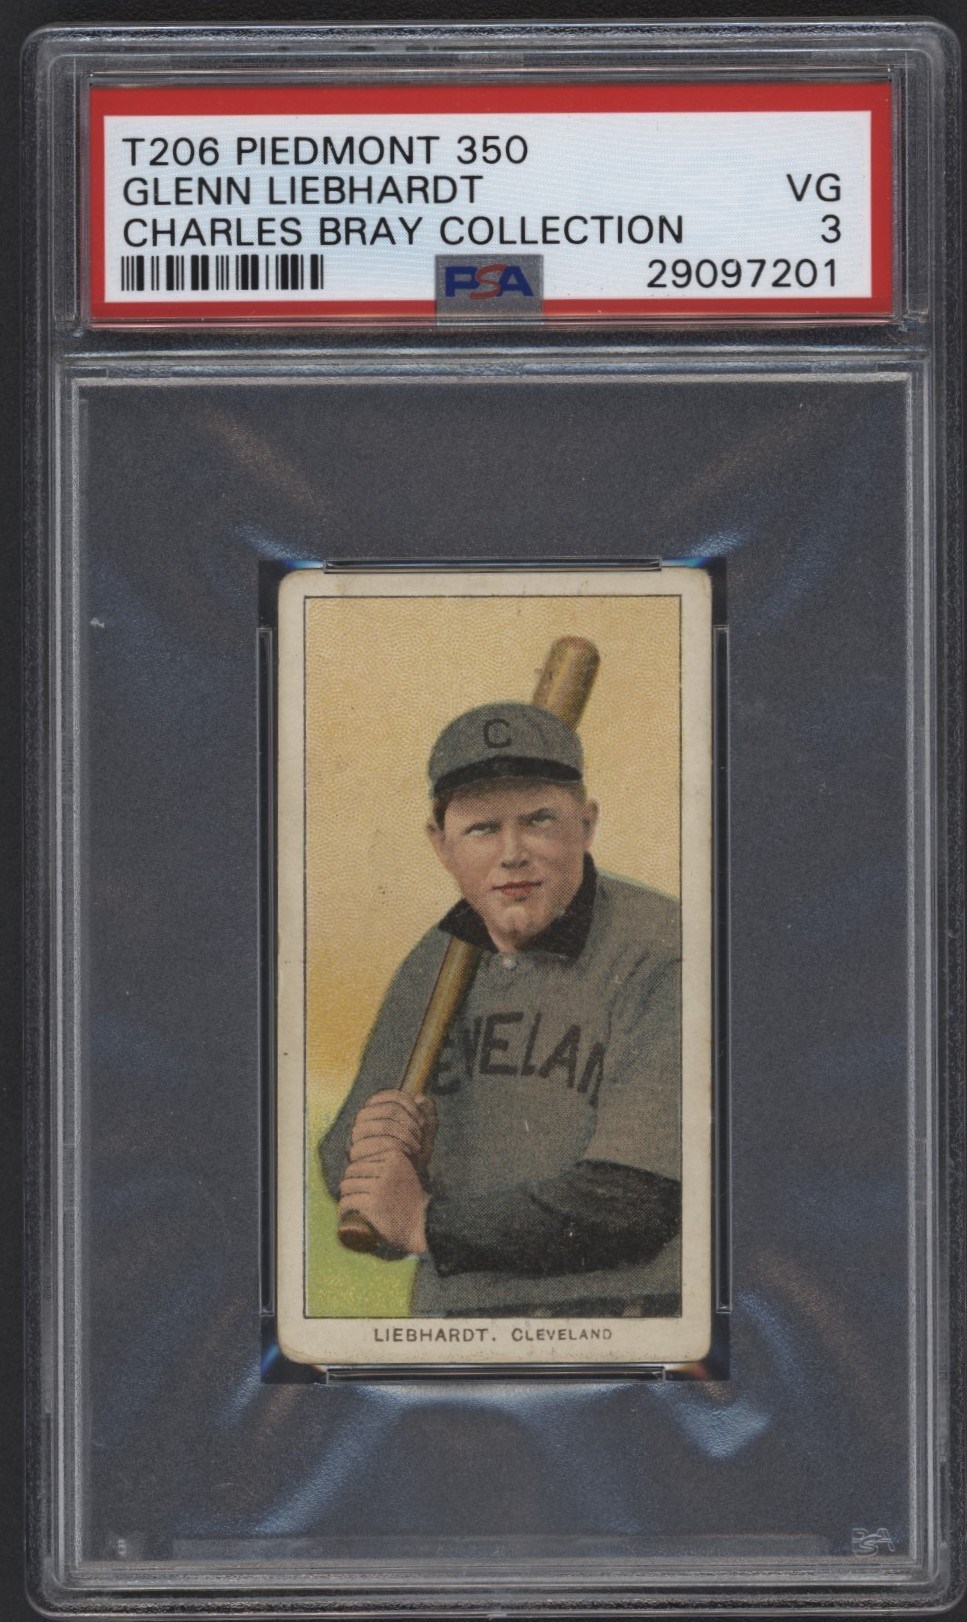 T206 Piedmont 350 Glenn Liebhardt PSA 3 From the Charles Bray Collection